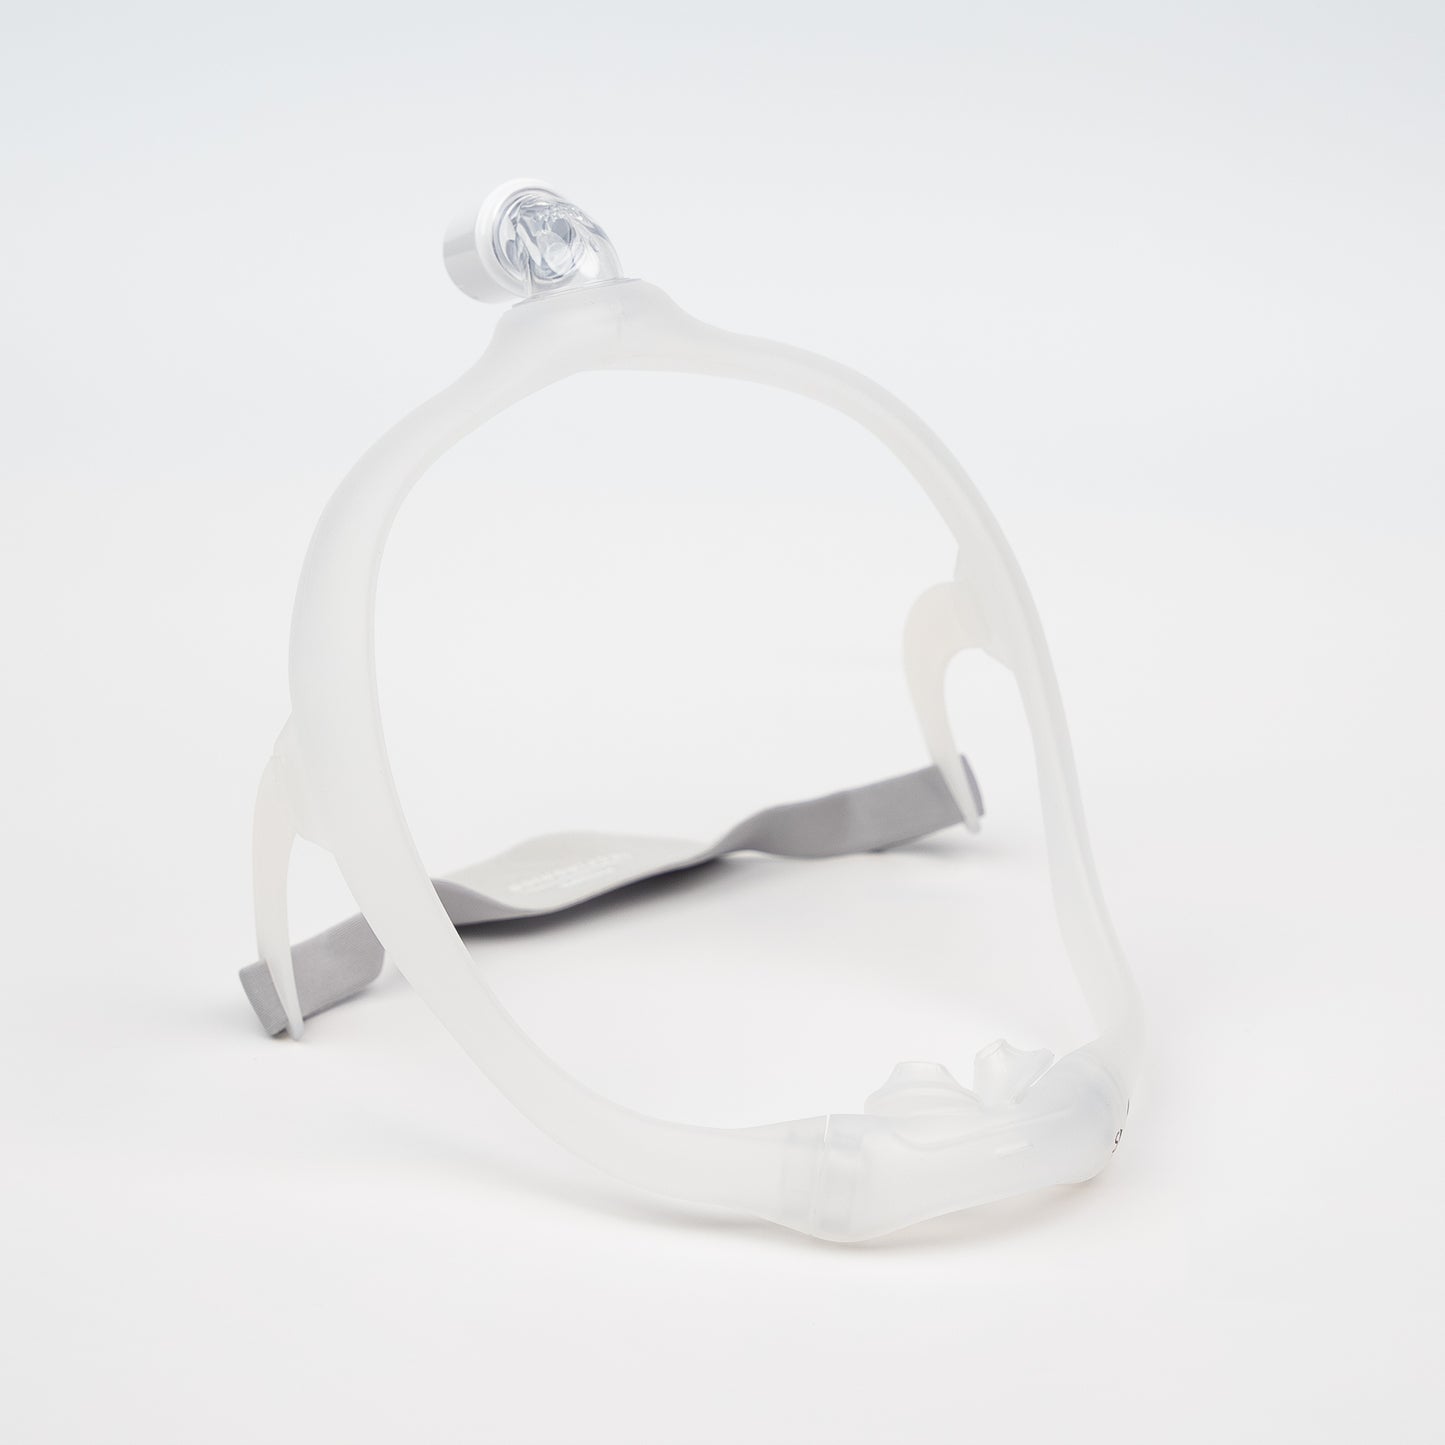 Philips Respironics DreamWear Silicone Pillows CPAP Mask with Headgear - Fit Pack